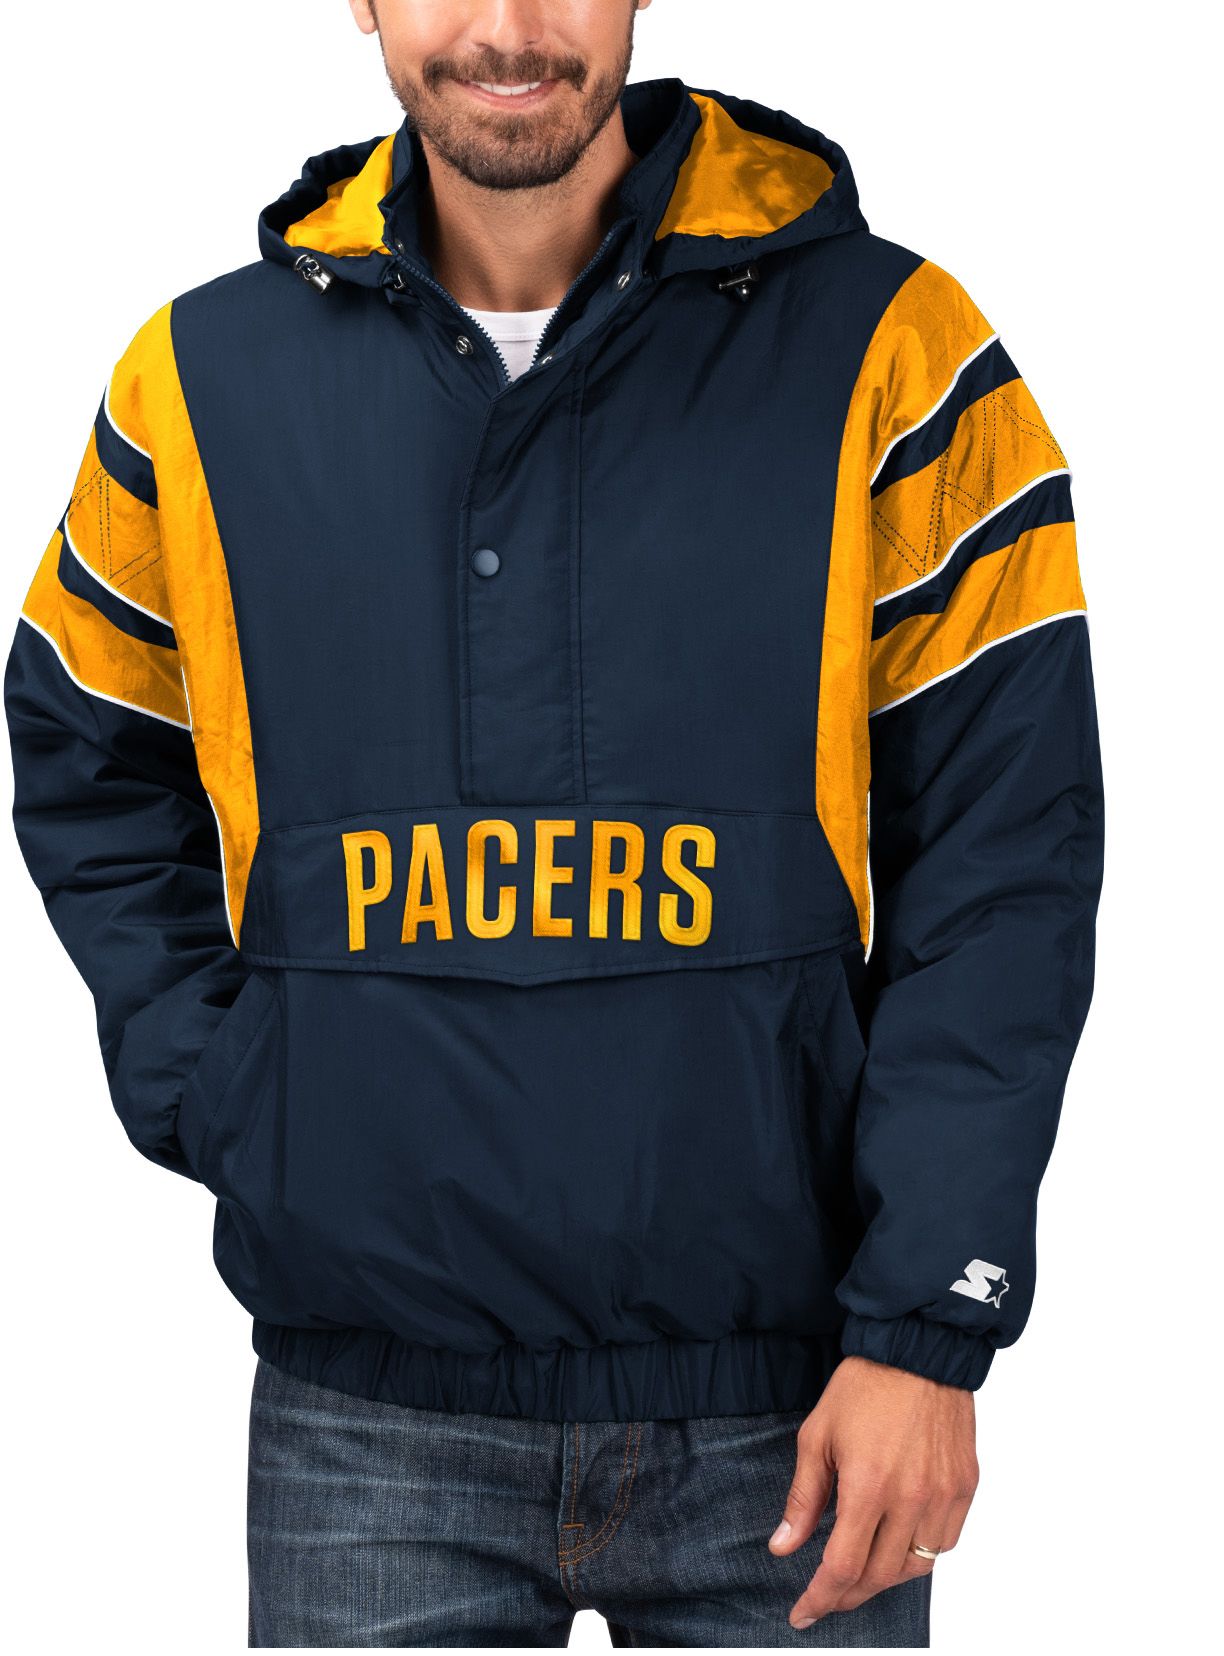 indiana pacers warm up jersey